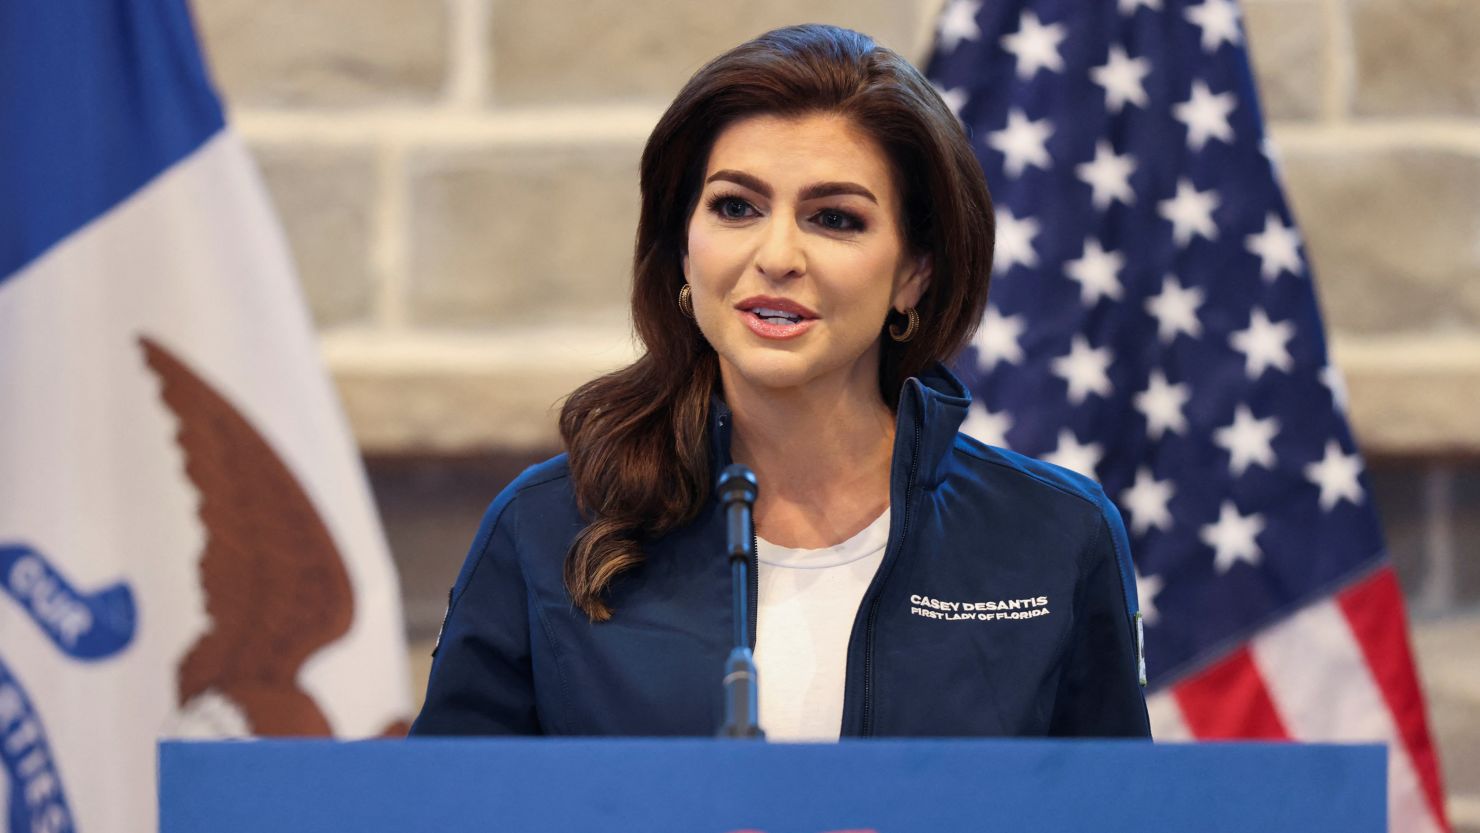 Florida first lady Casey DeSantis talks about her husband Florida Governor Ron Desantis to Iowa residents as she campaigns with him on his second day of campaigning as an official candidate for the 2024 U.S. Republican presidential nomination, at Sun Valley Barn in Pella, Iowa, U.S. May 31, 2023.  